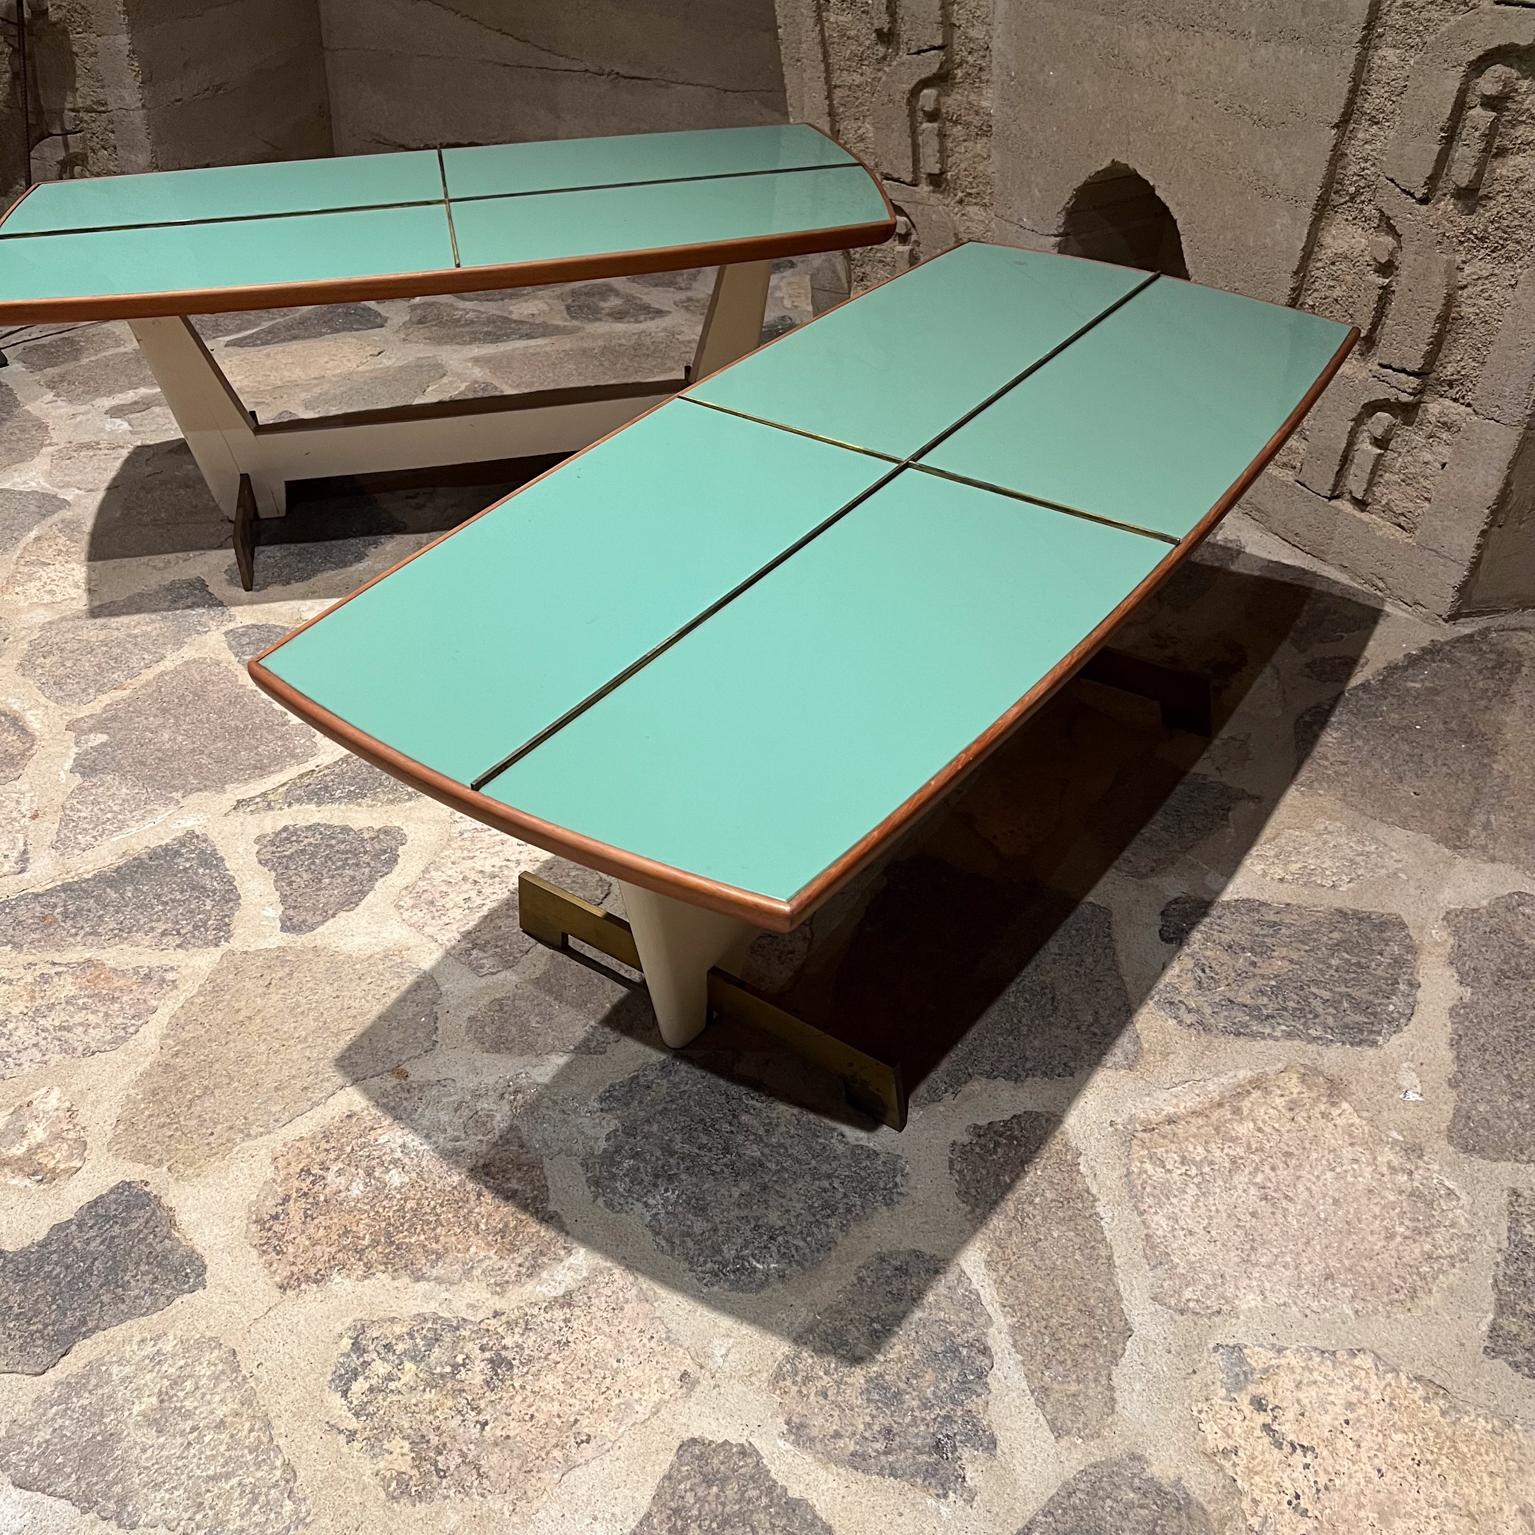  1960s Arturo Pani Glass Tiled Solid Wood Coffee Table Mexico City For Sale 2